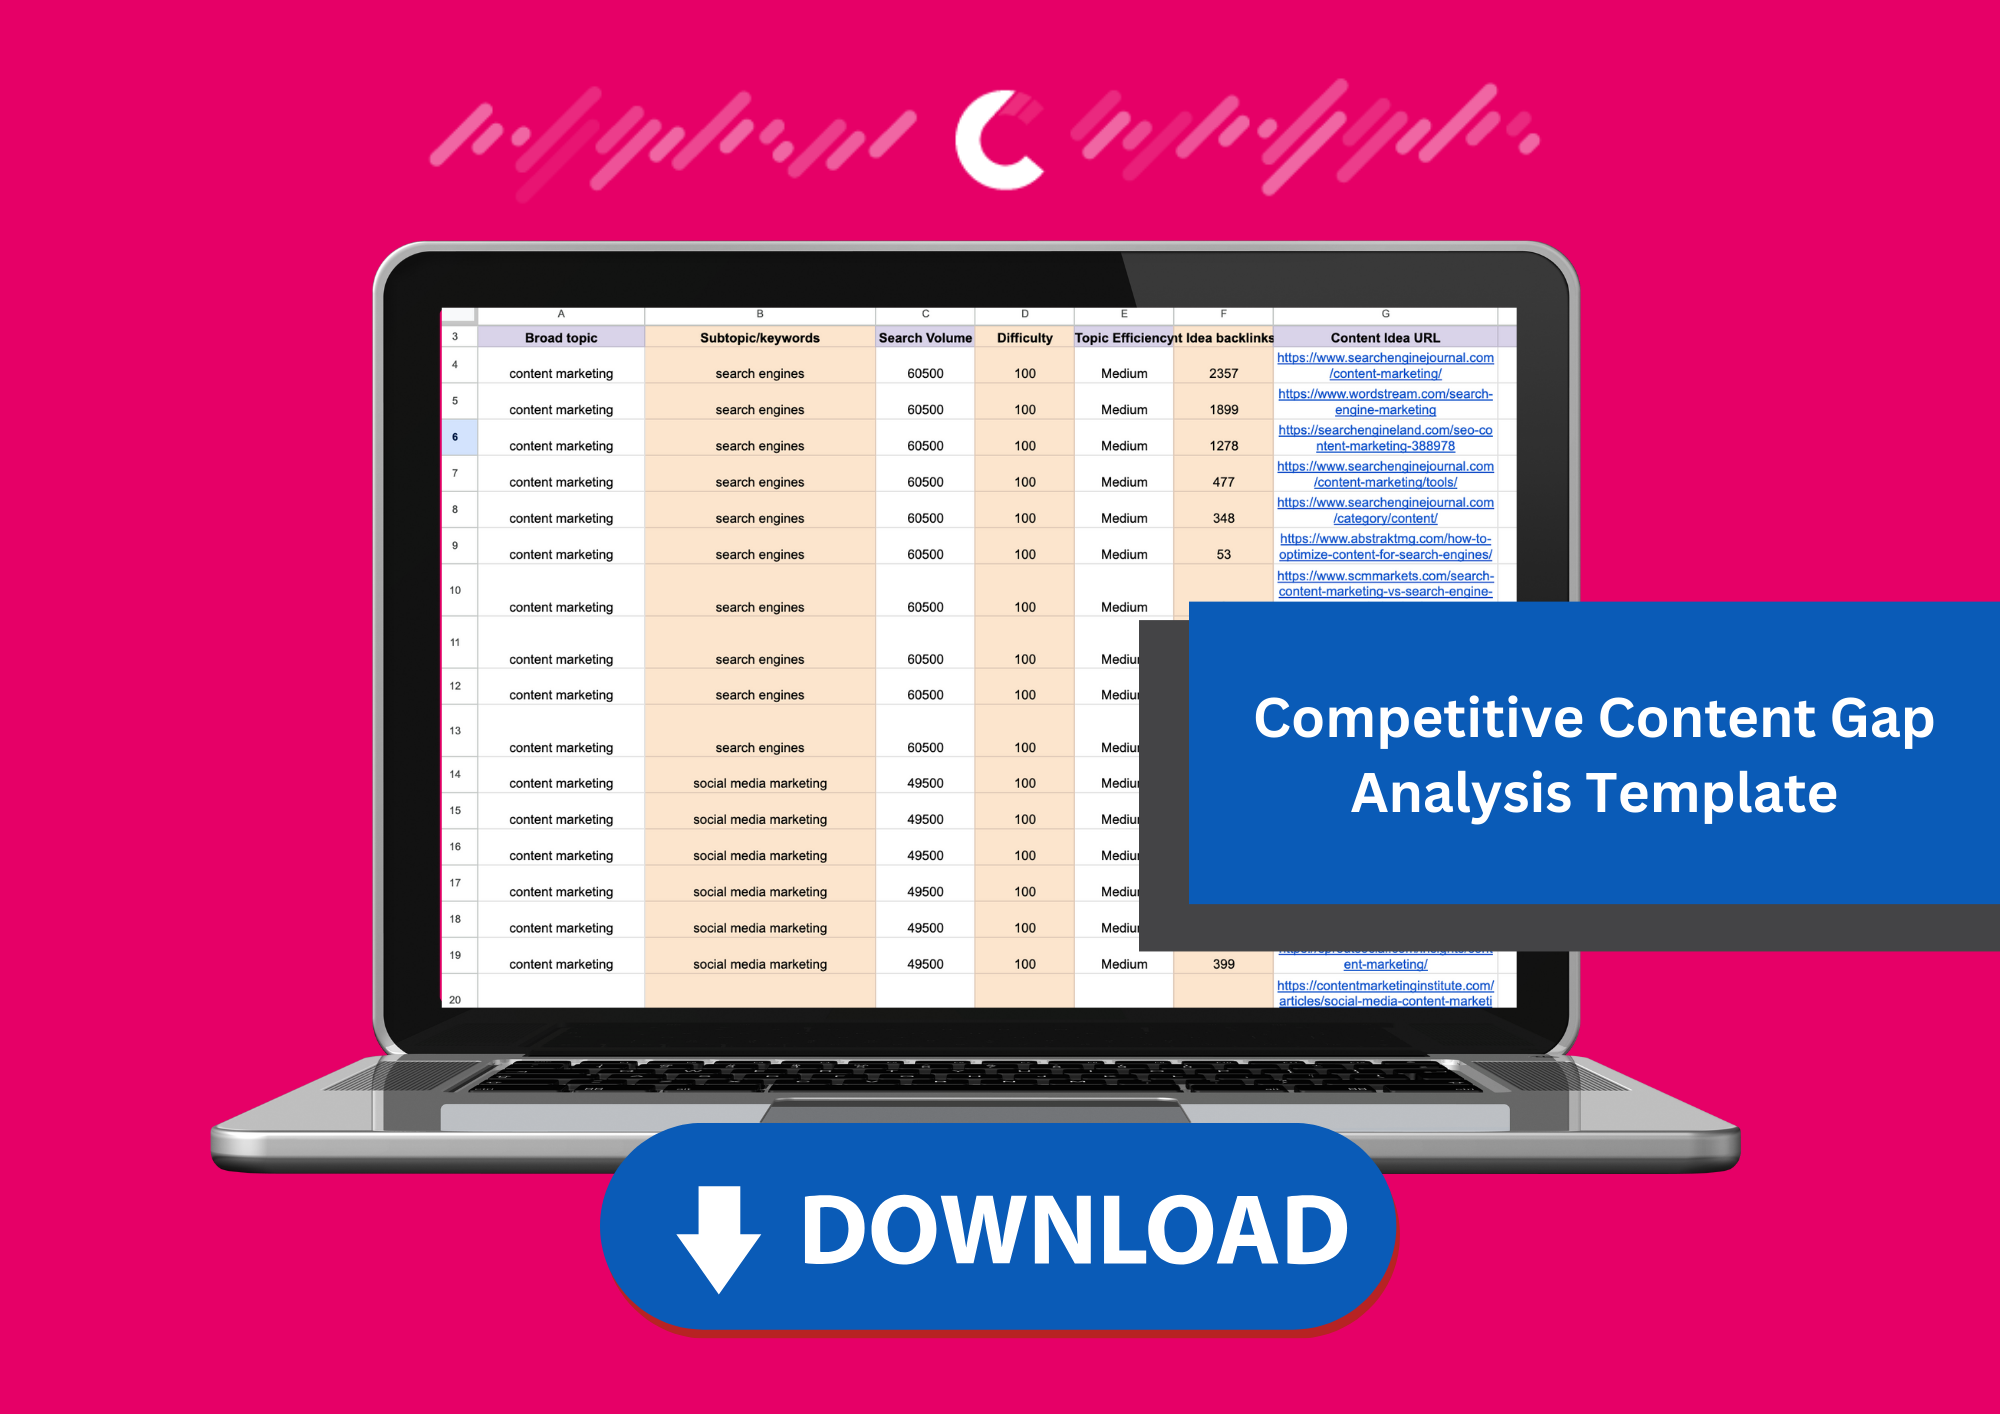 Competitive Content Gap Analysis Template competitors app